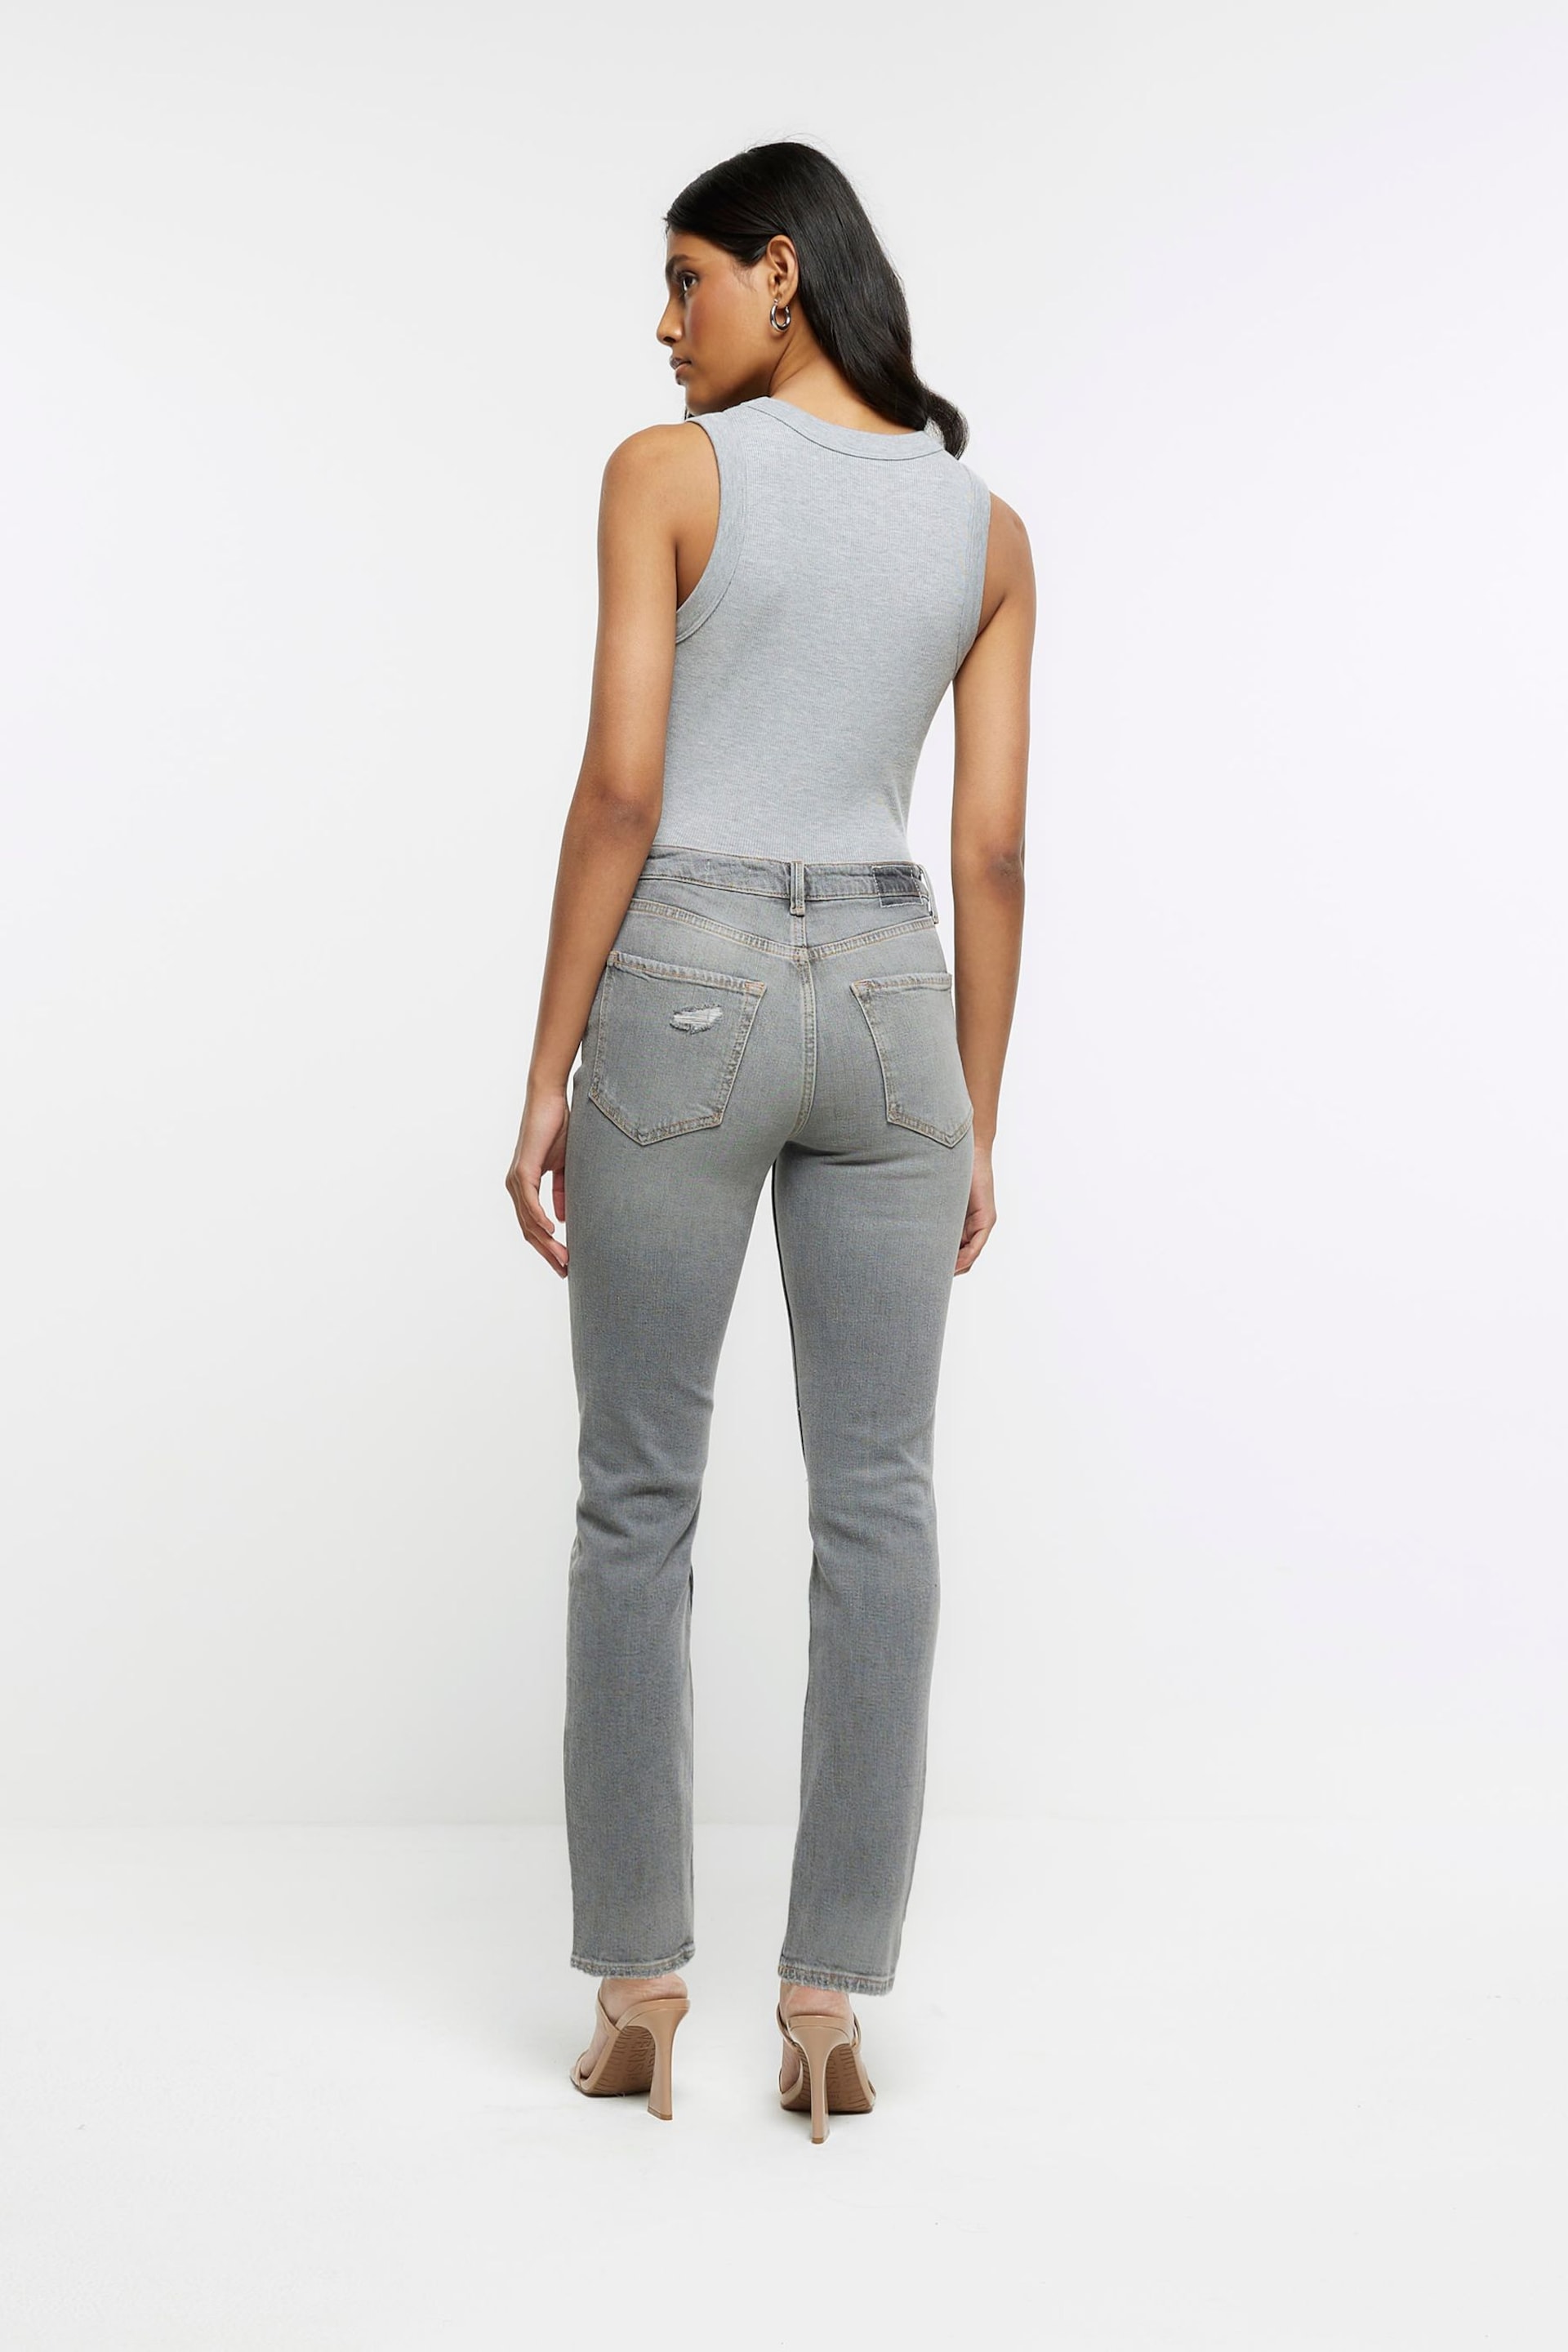 River Island Grey High Rise Slim Straight Non - Strtech Ripped Jeans - Image 2 of 5